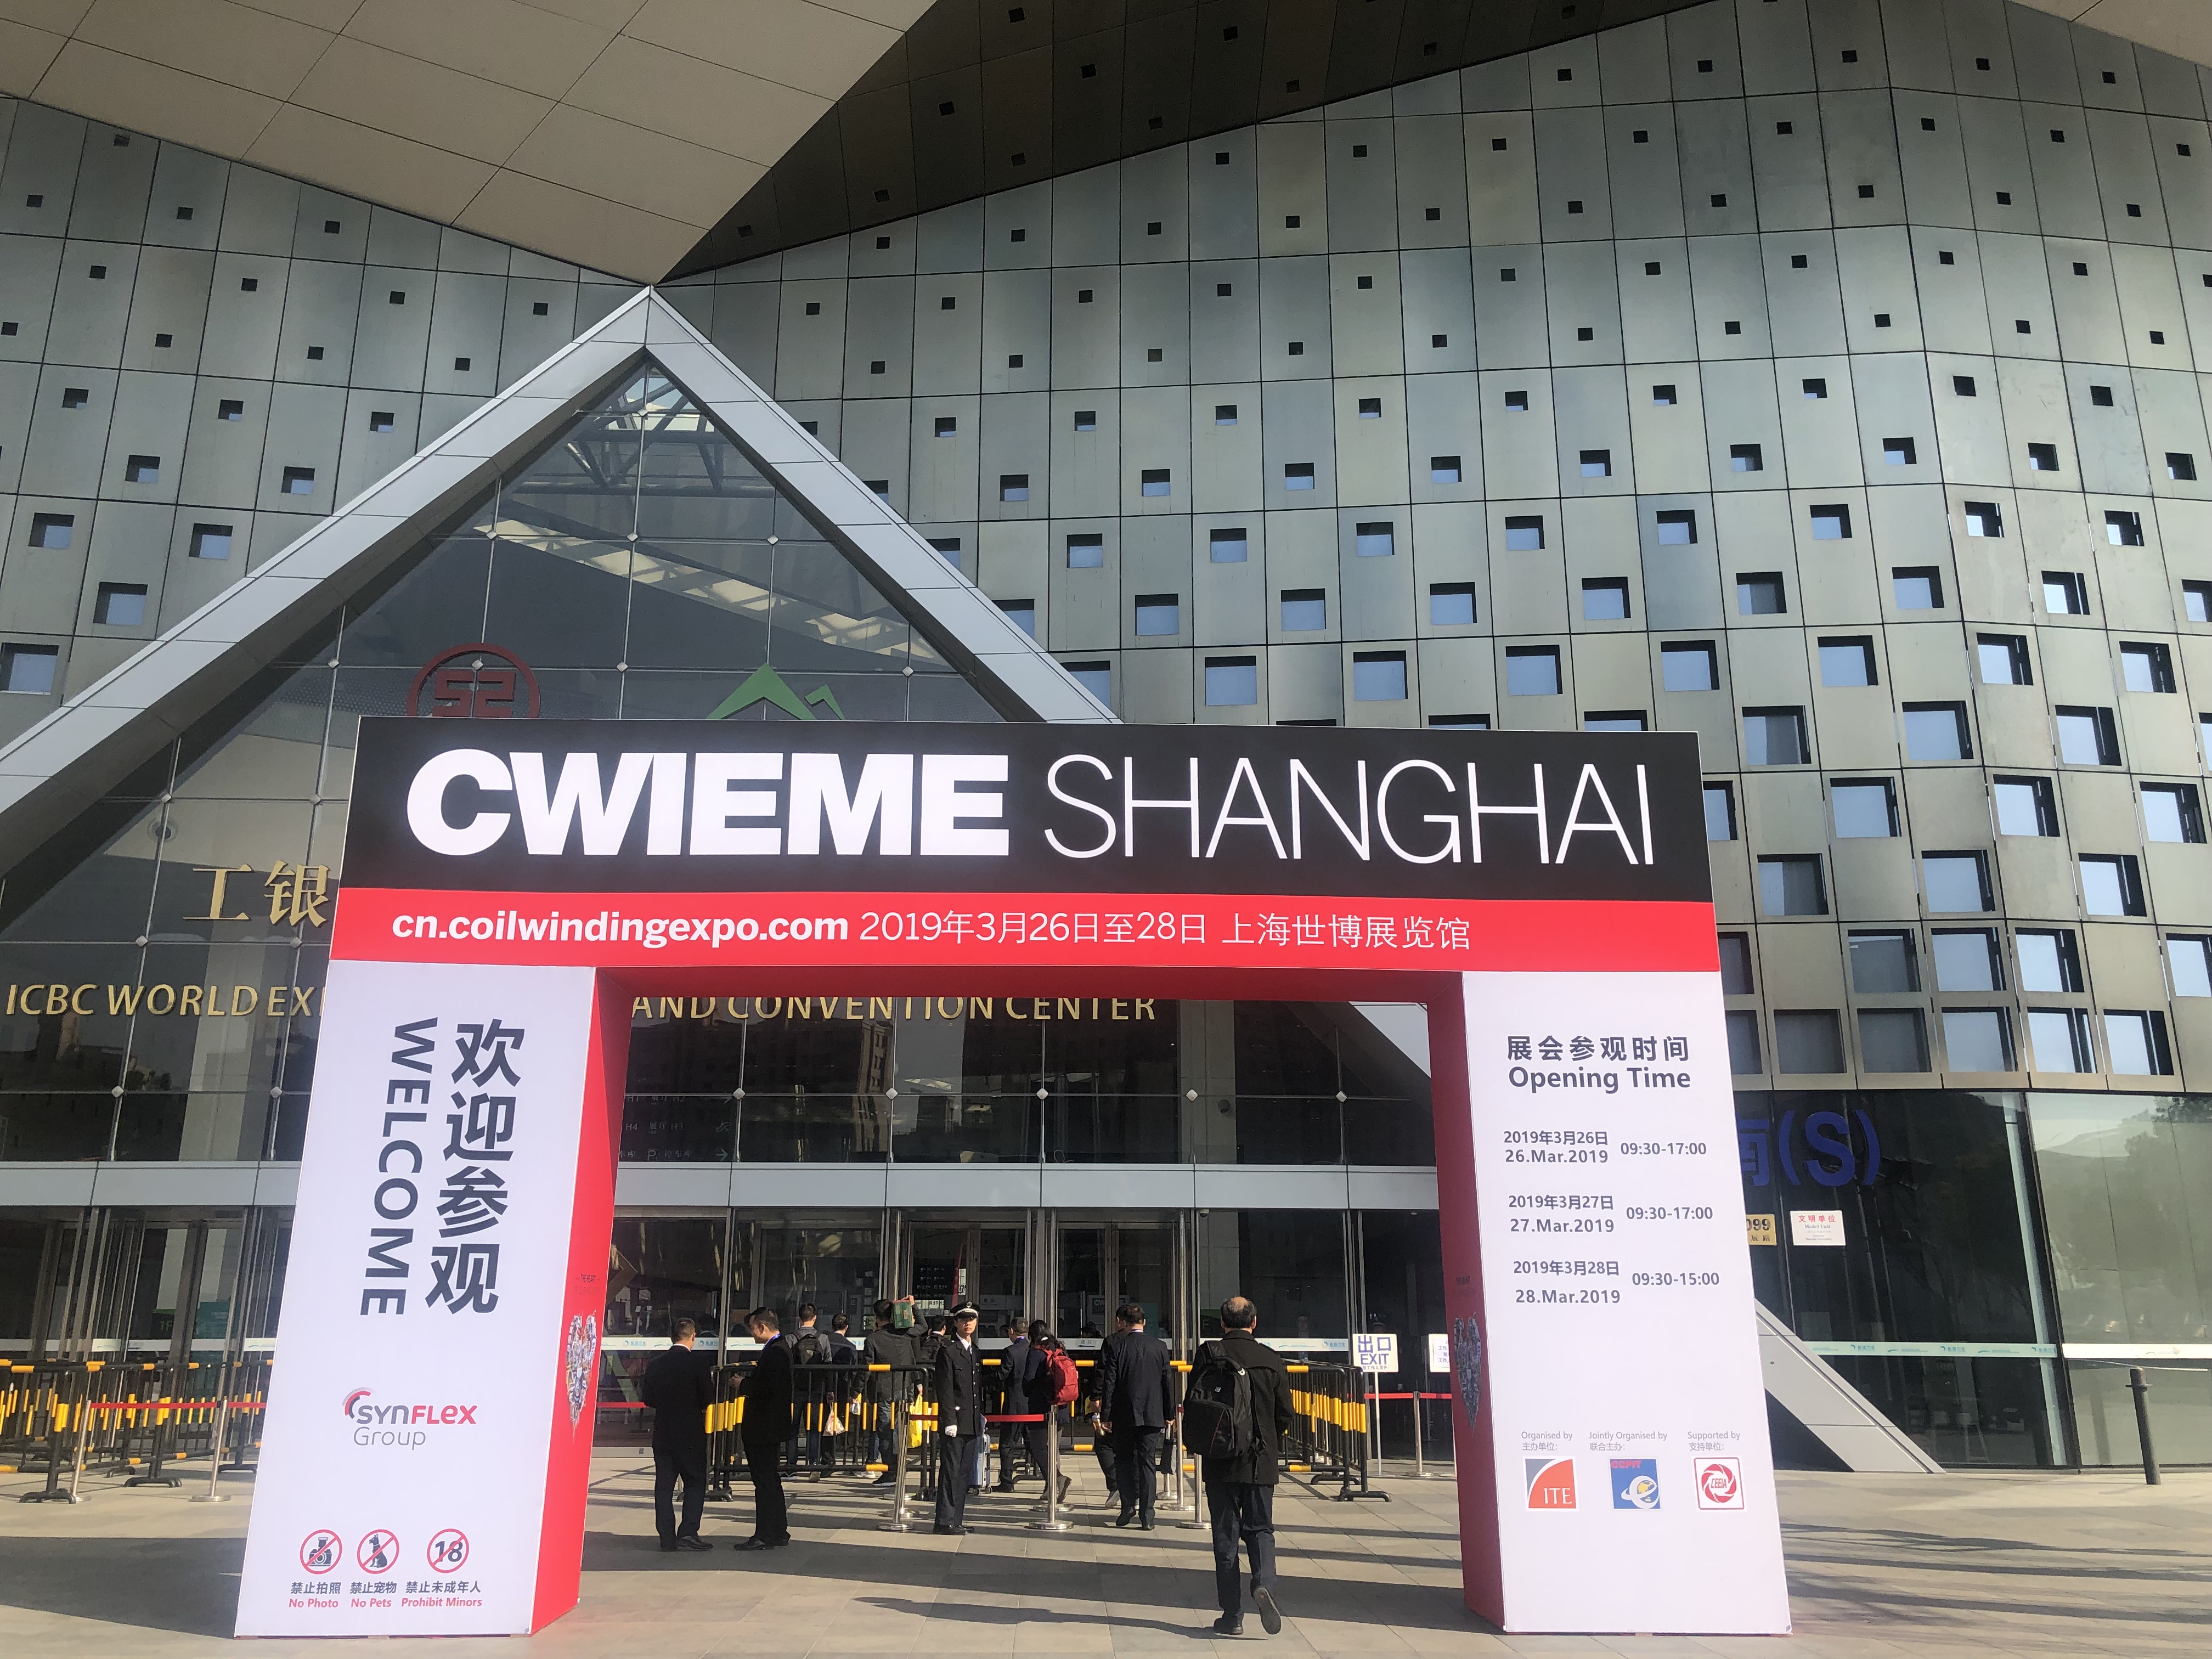 Kaisheng company participated CWIEME exhibition in Shanghai on 26th-28th March  